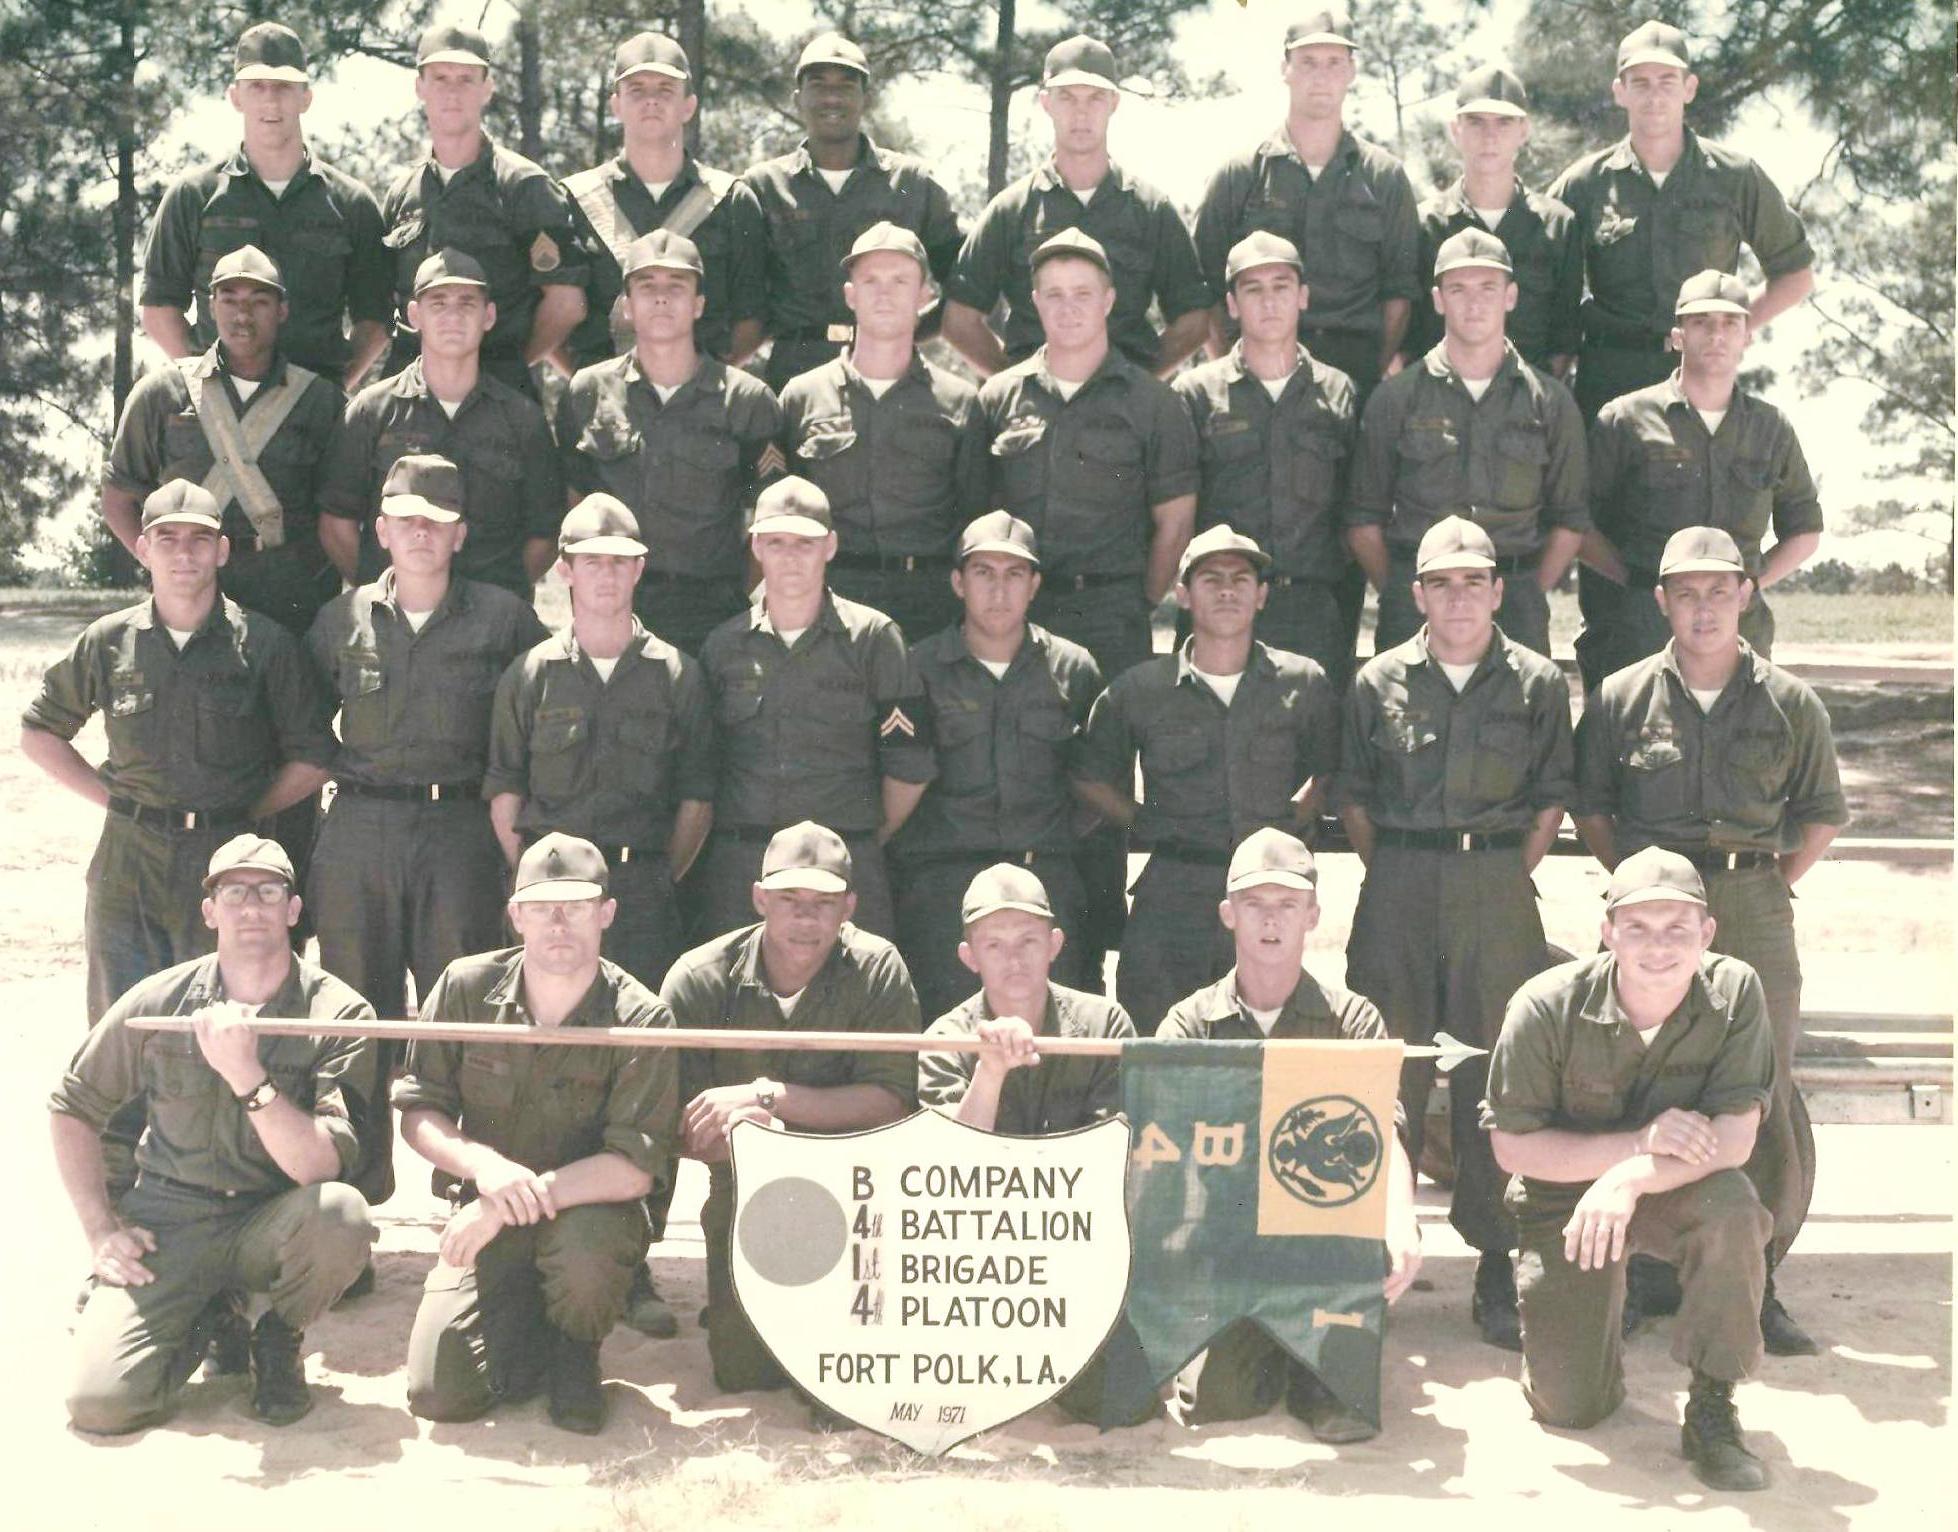 bill-sheka-sgt-stripes-2nd-row-from-top-3rd-from-left-fort-polk-louisiana-bravo-company-4th-battalion-1-combat-brigade-4th-platoon-squad-leaders-and-assistant-squad-leaders_0